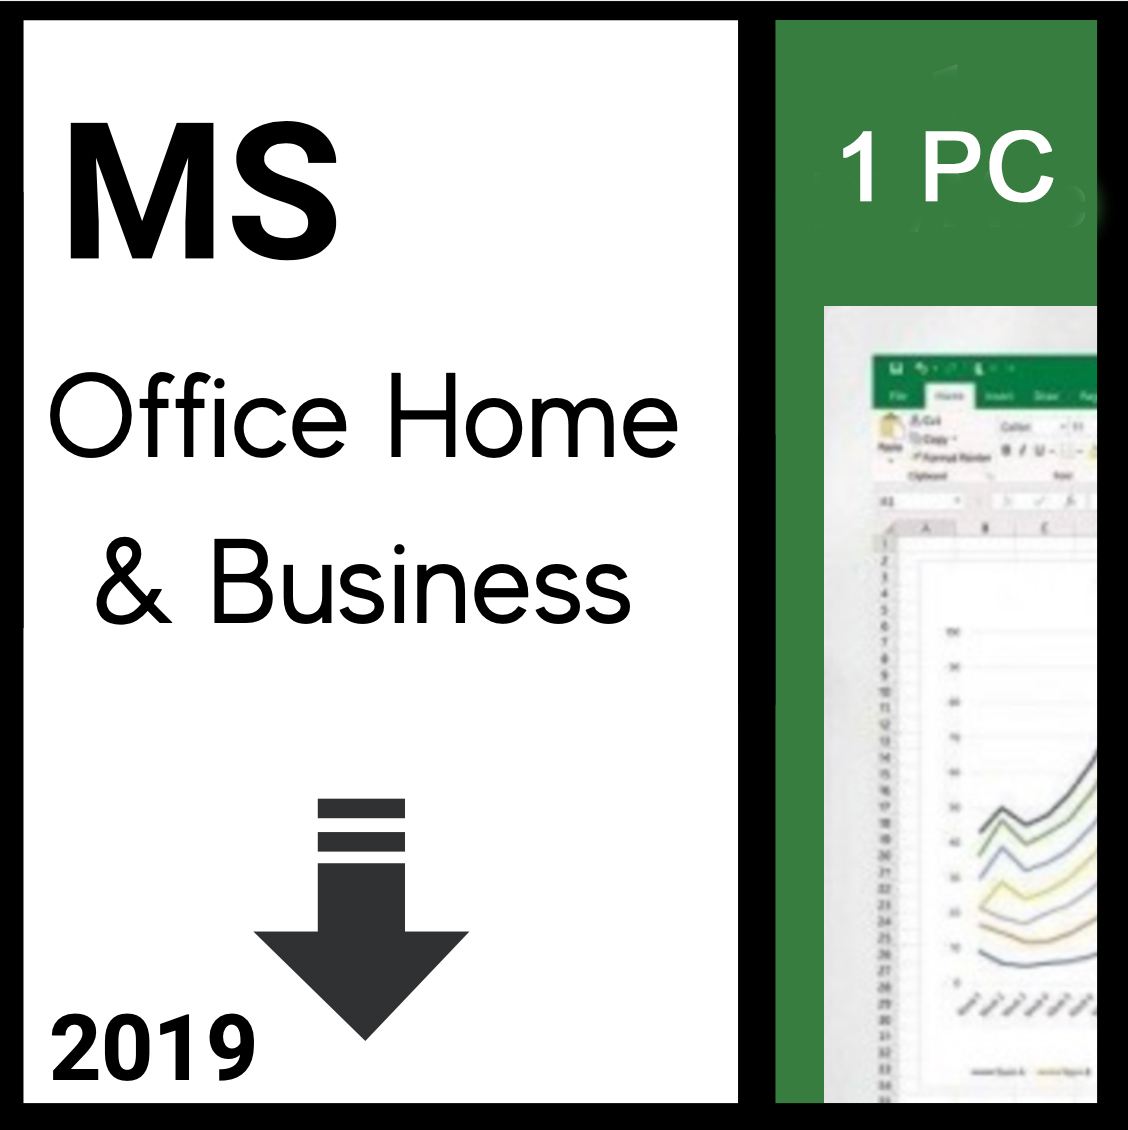 MS Office Home & Business 2019 32-bit/x64 1PC user license - Download